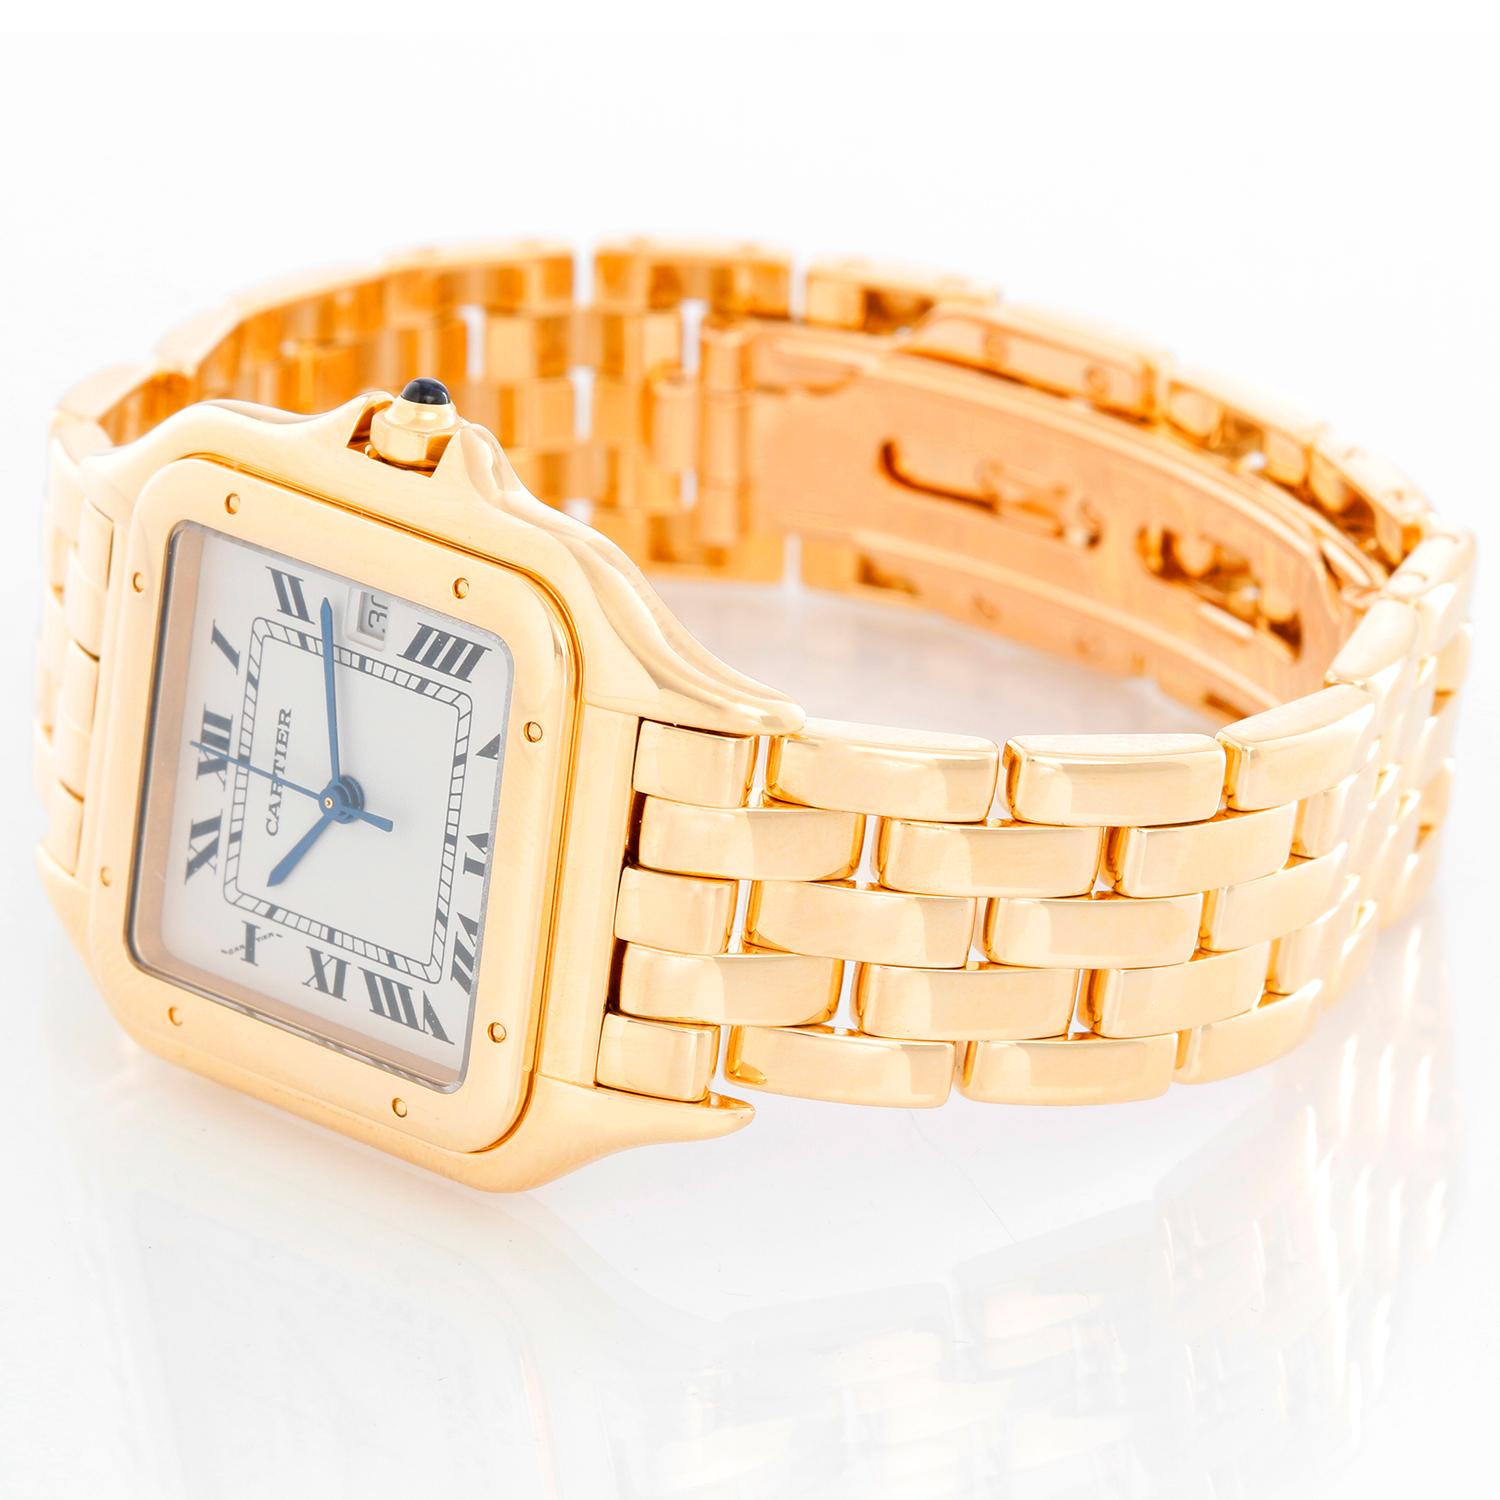 Cartier Panther 18k Yellow Gold Men's Quartz Watch with Date W25014B9 - Quartz. 18k yellow gold case (27mm x 37mm). Ivory colored dial with black Roman numerals and date at 3 o'clock. 18k yellow gold Cartier Panther bracelet with deployant clasp.